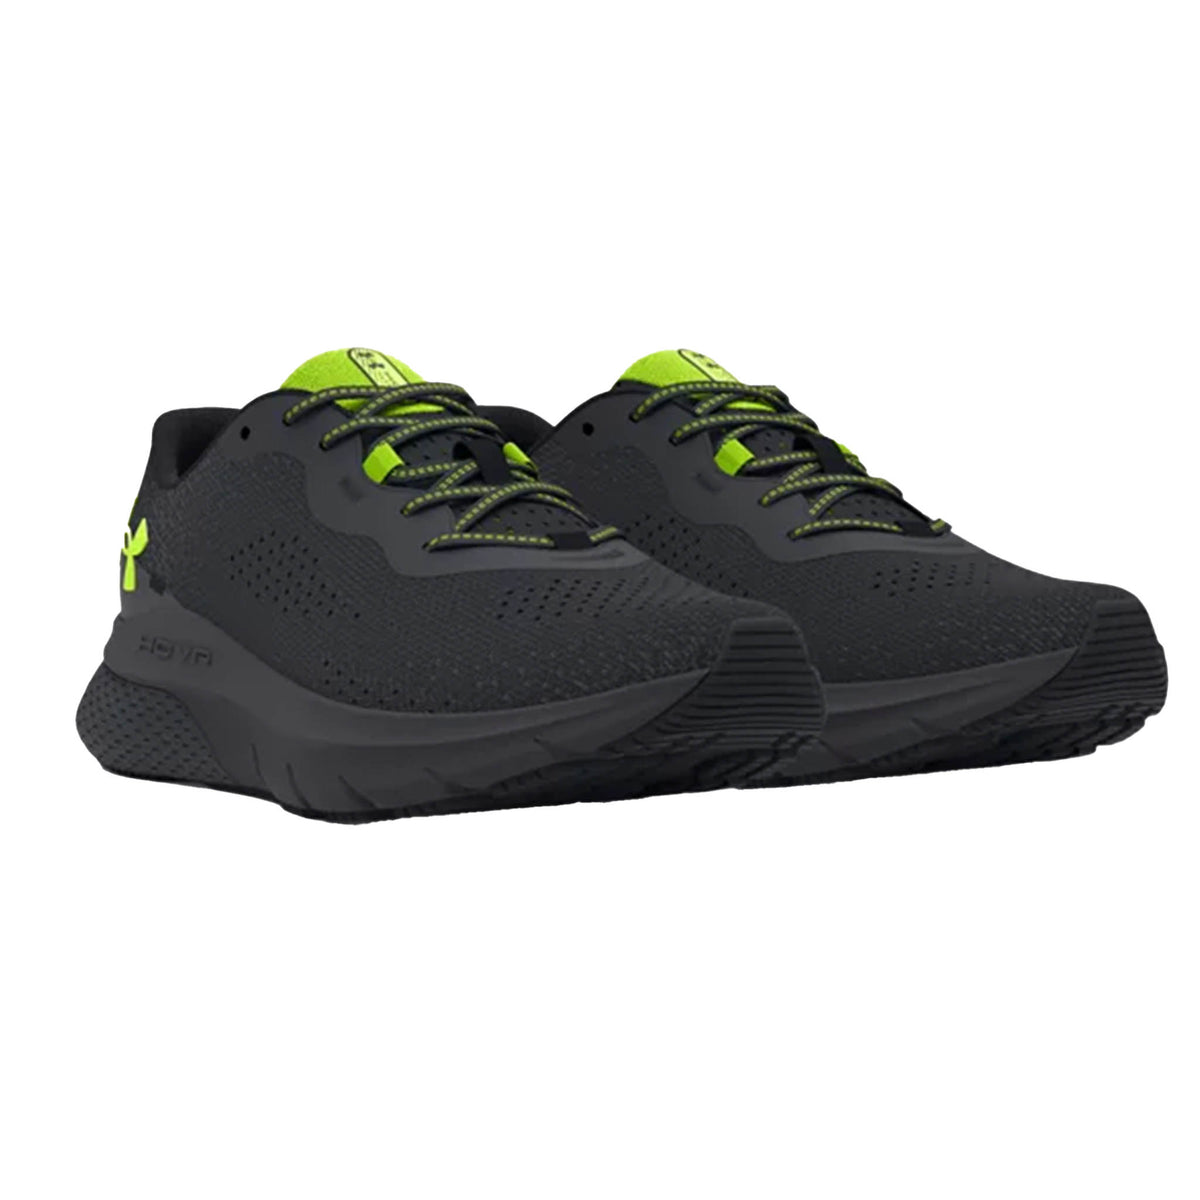 Under Armour HOVR Turbulence 2 Kids Running Shoes: Black/Yellow